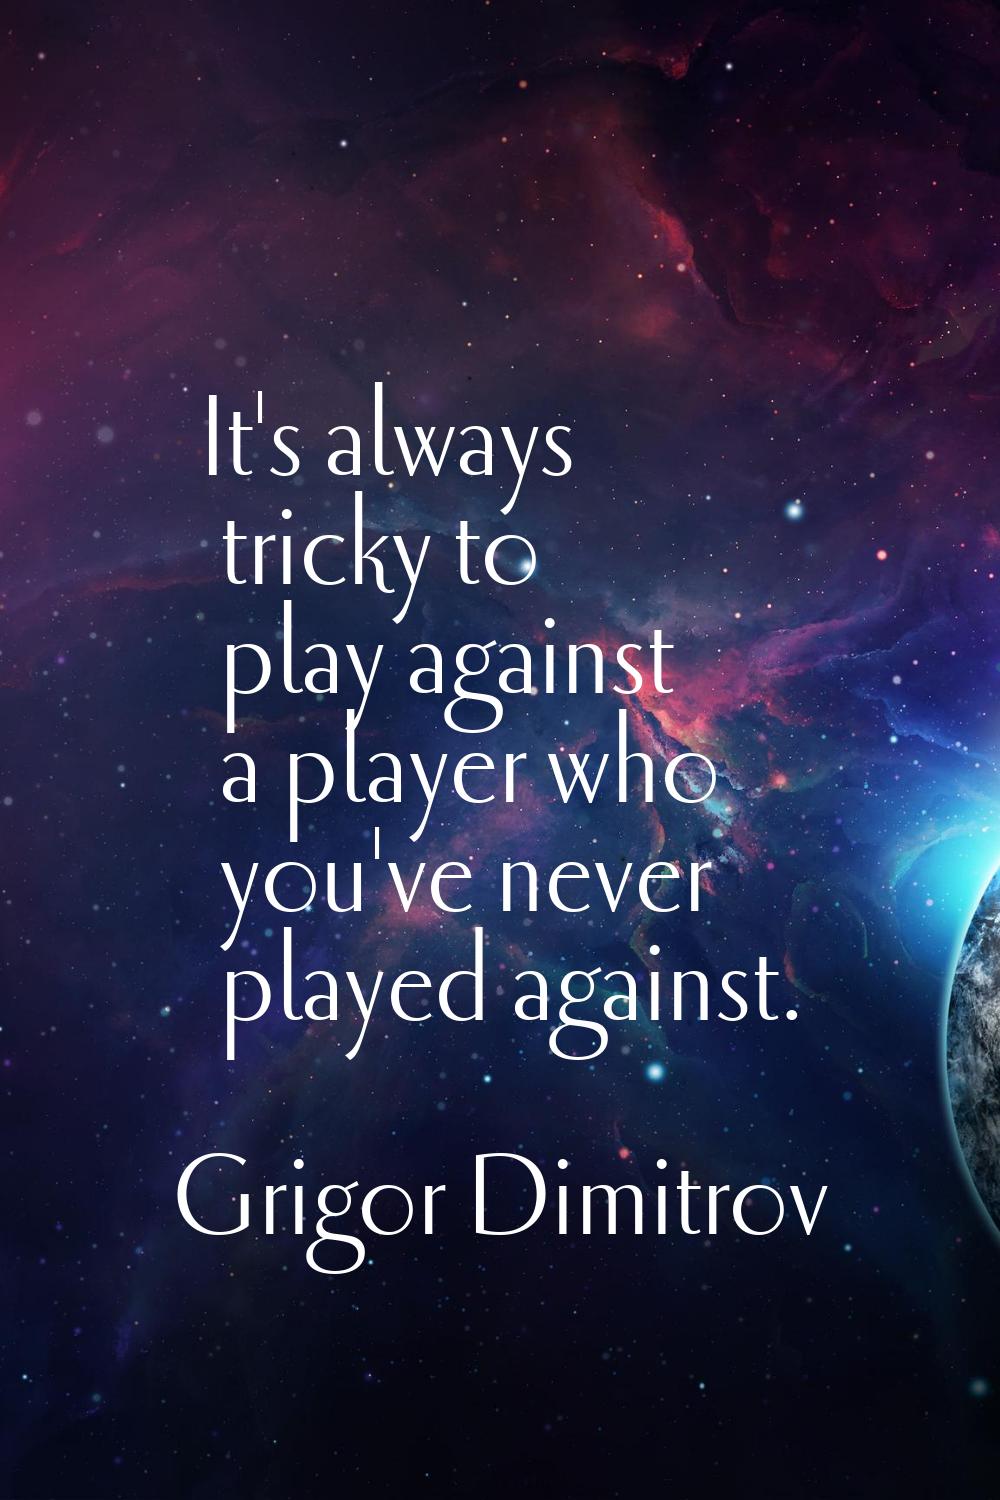 It's always tricky to play against a player who you've never played against.